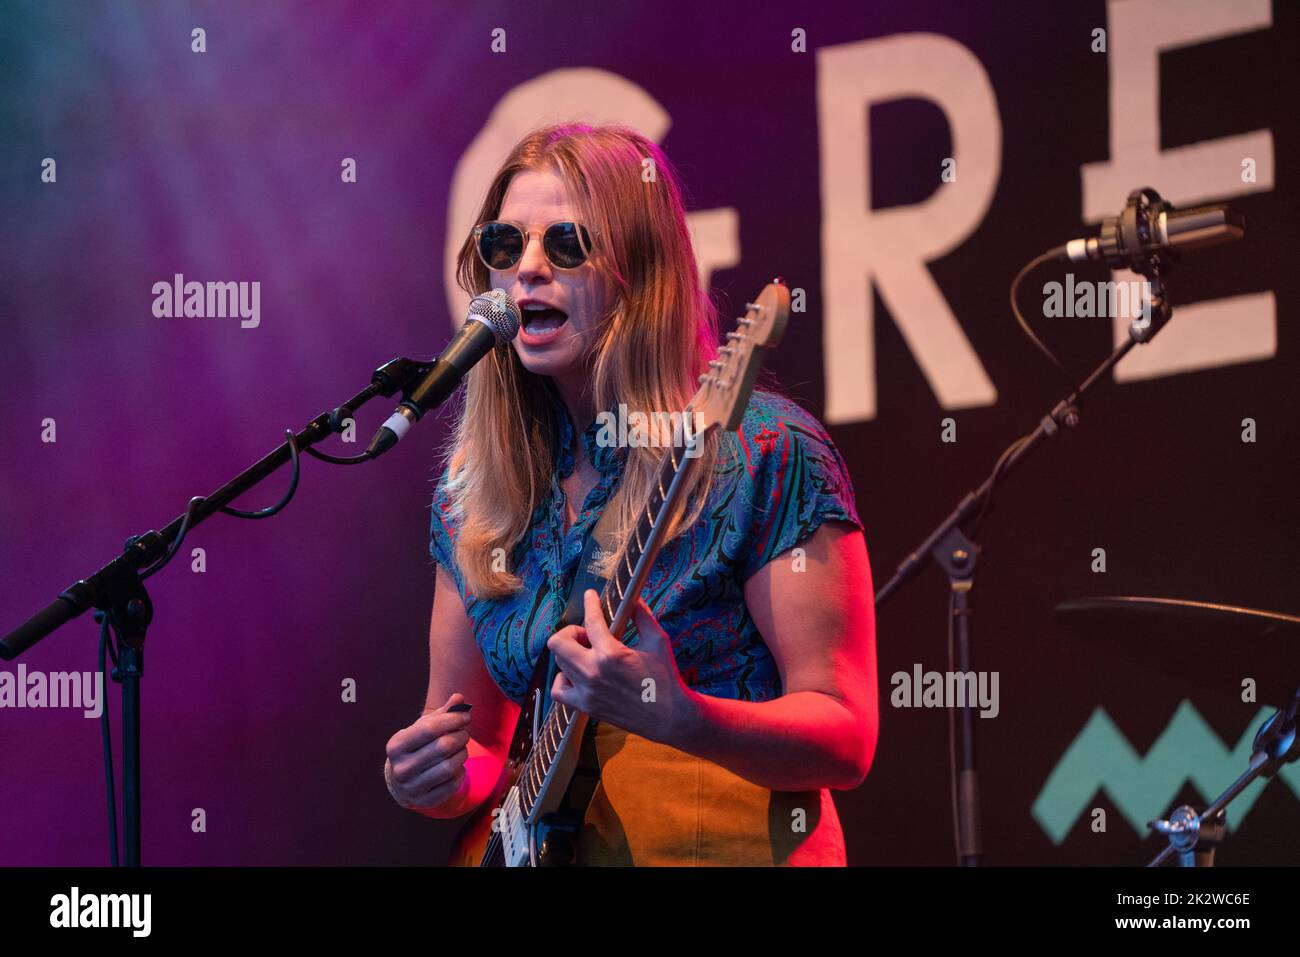 Sugar Candy Mountain play the Walled Garden Stage at the Green Man Festival 2022 in Wales, UK, August 2022. Picture: Rob Watkins/Alamy Stock Photo